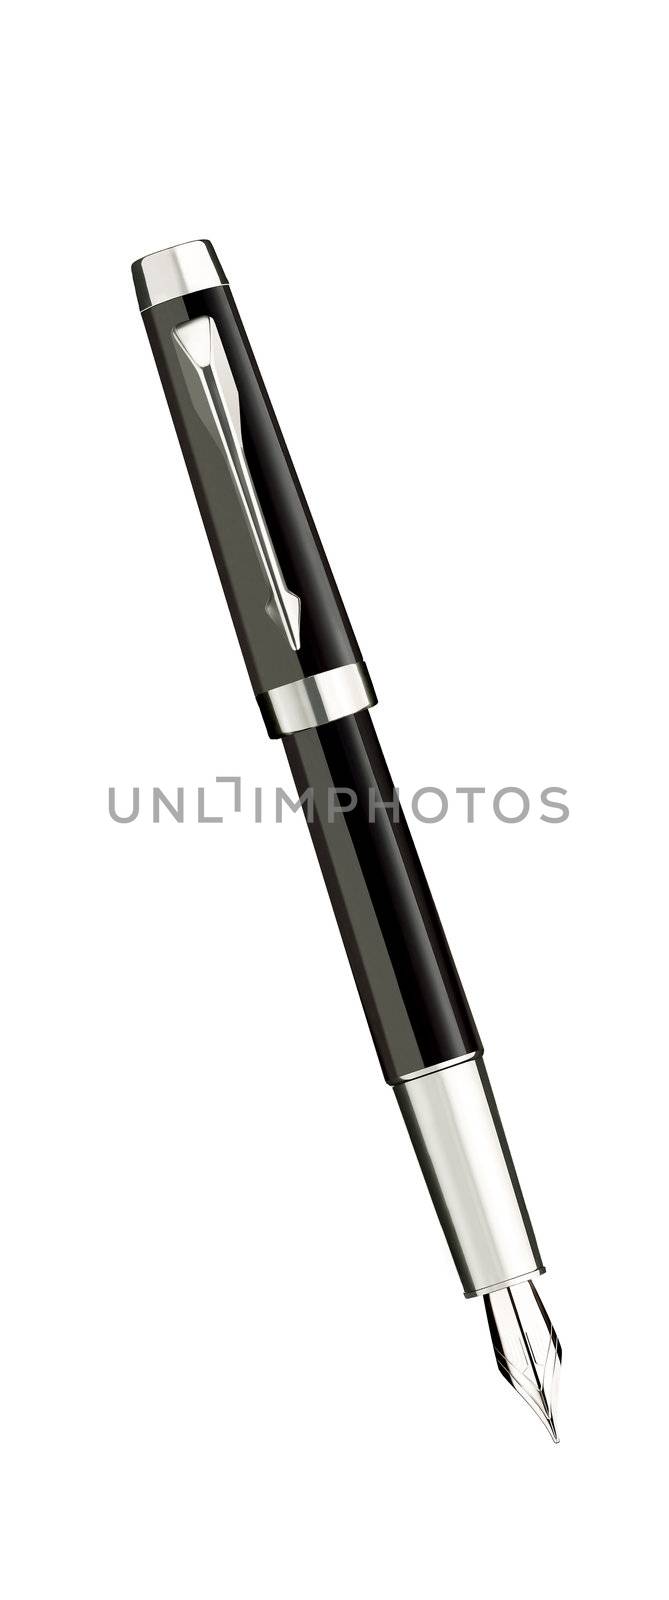 Fountain pen isolated on white background close up